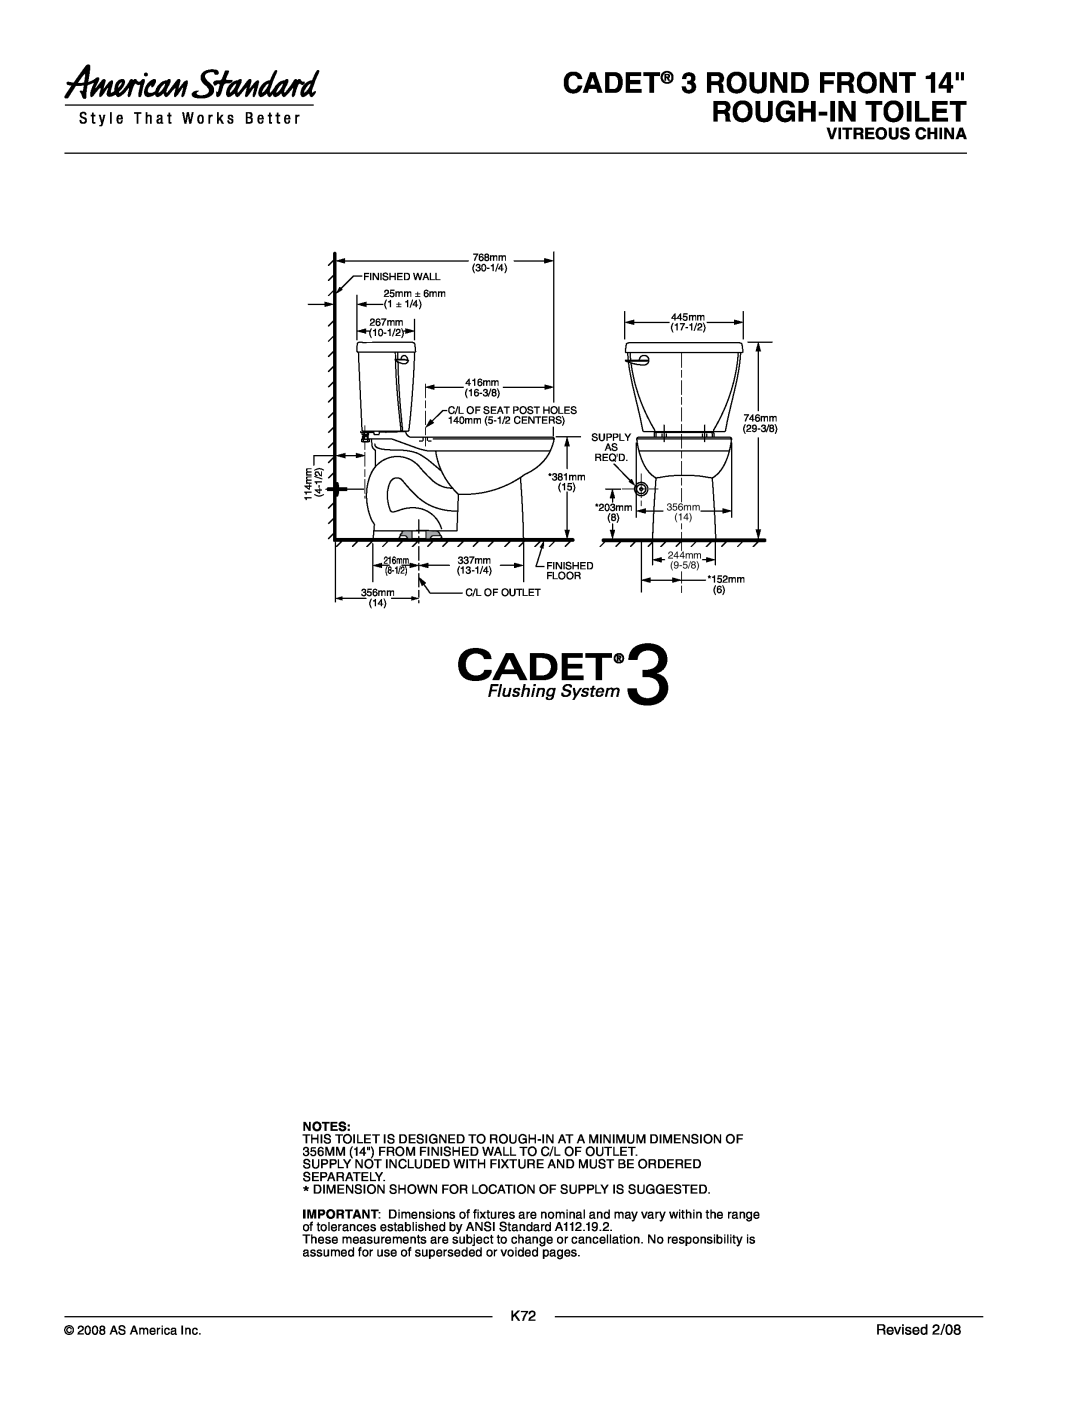 American Standard 2384.014 dimensions CADET 3 ROUND FRONT ROUGH-INTOILET, Vitreous China, Revised 2/08 